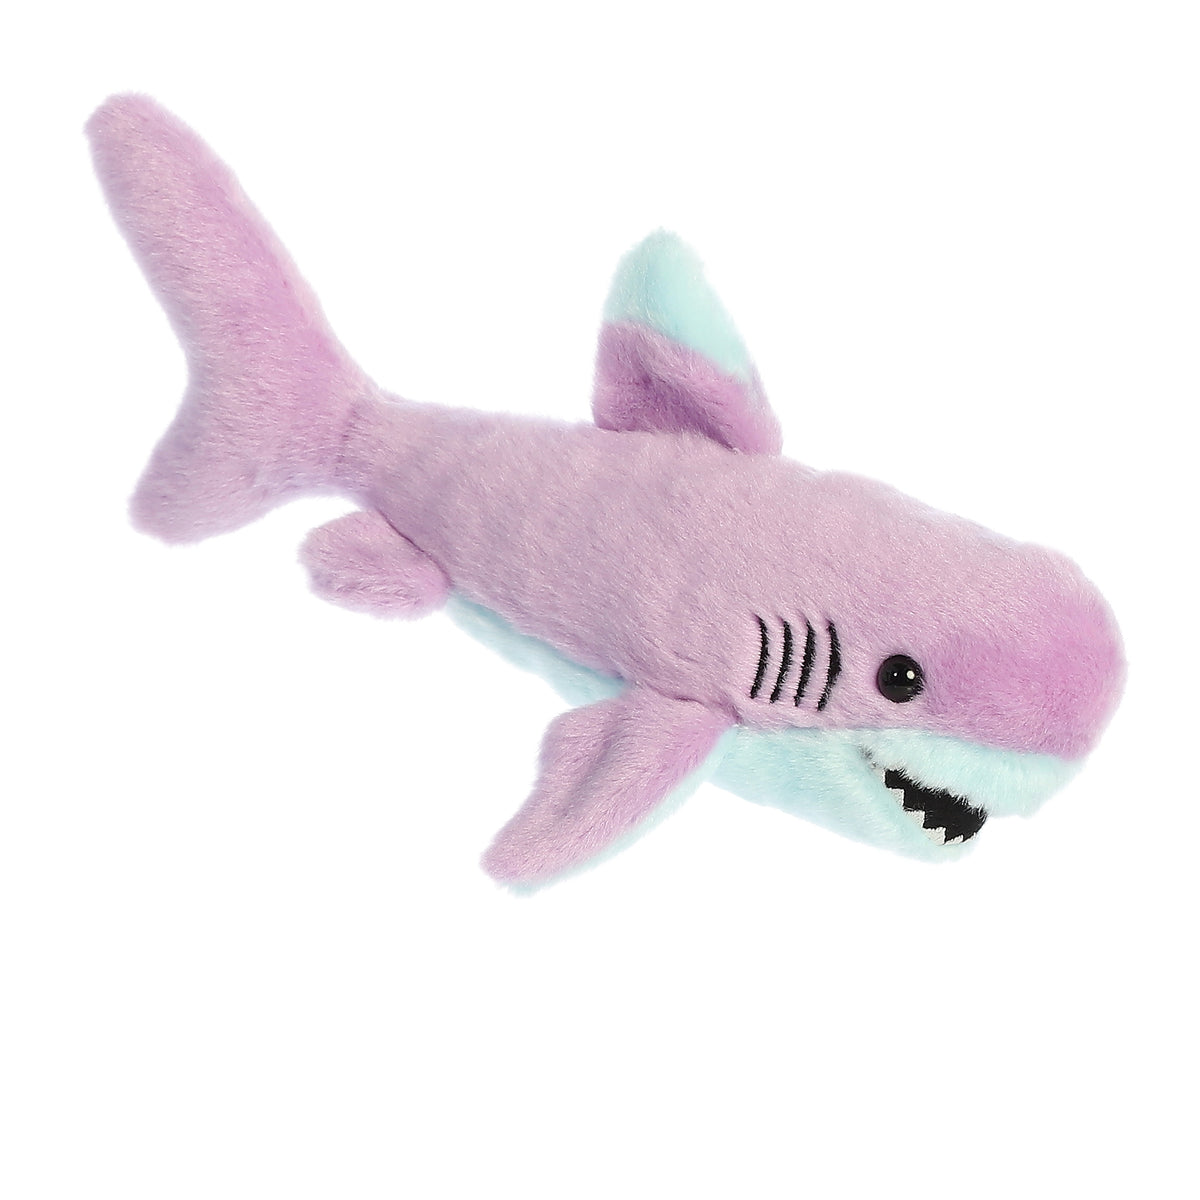 Adorable Colorful Shark plush with a light blue belly and light pink upper body, grinning from gill to gill!